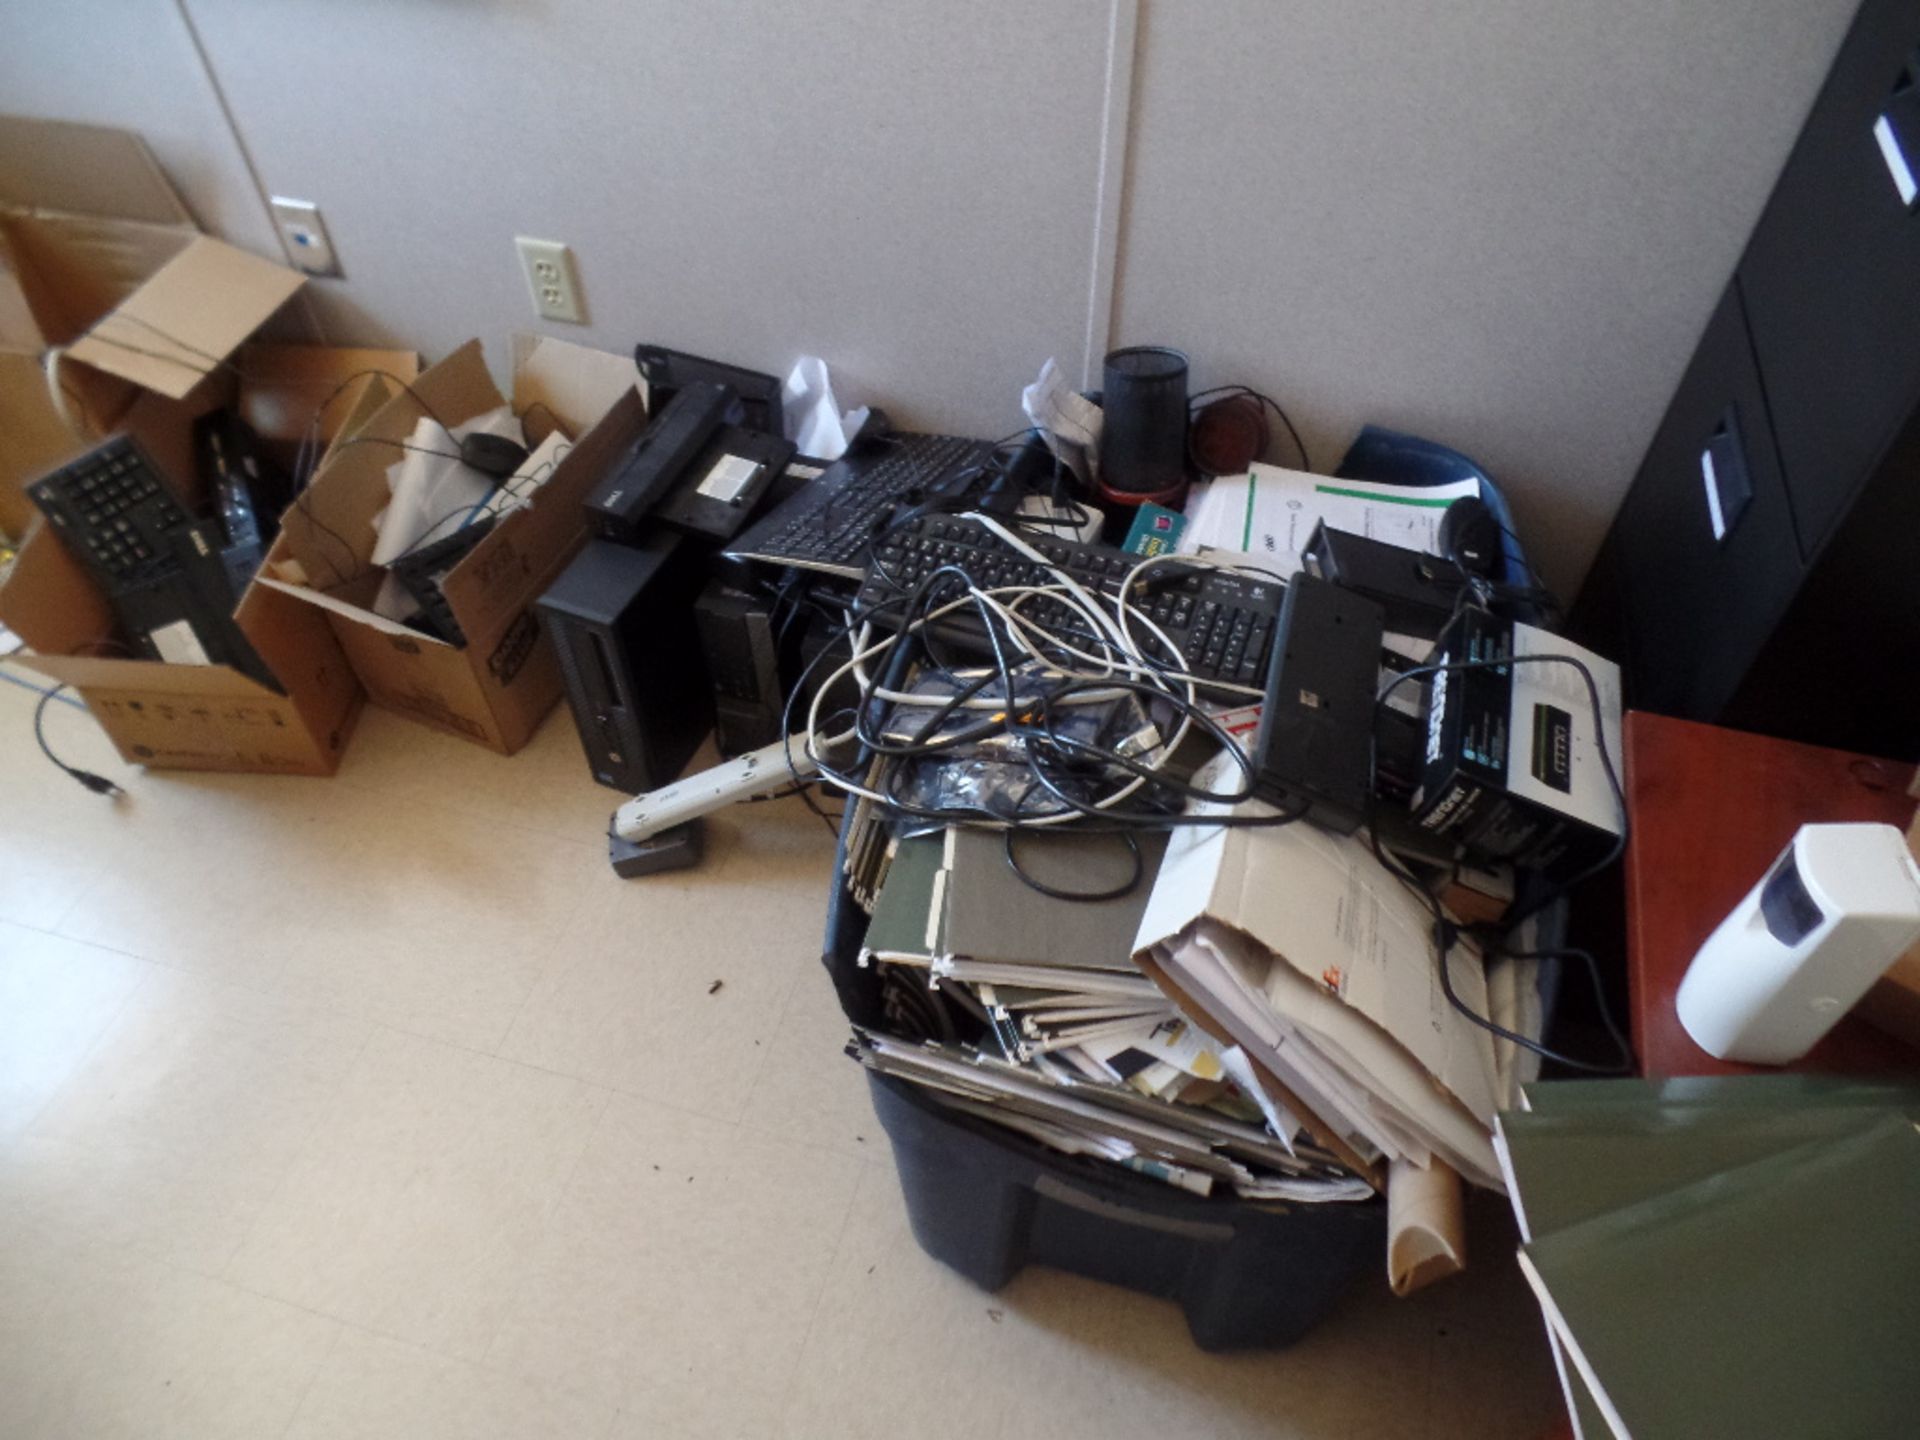 {LOT} In Office c/o: Asst. Office Electronics & Office Furniture